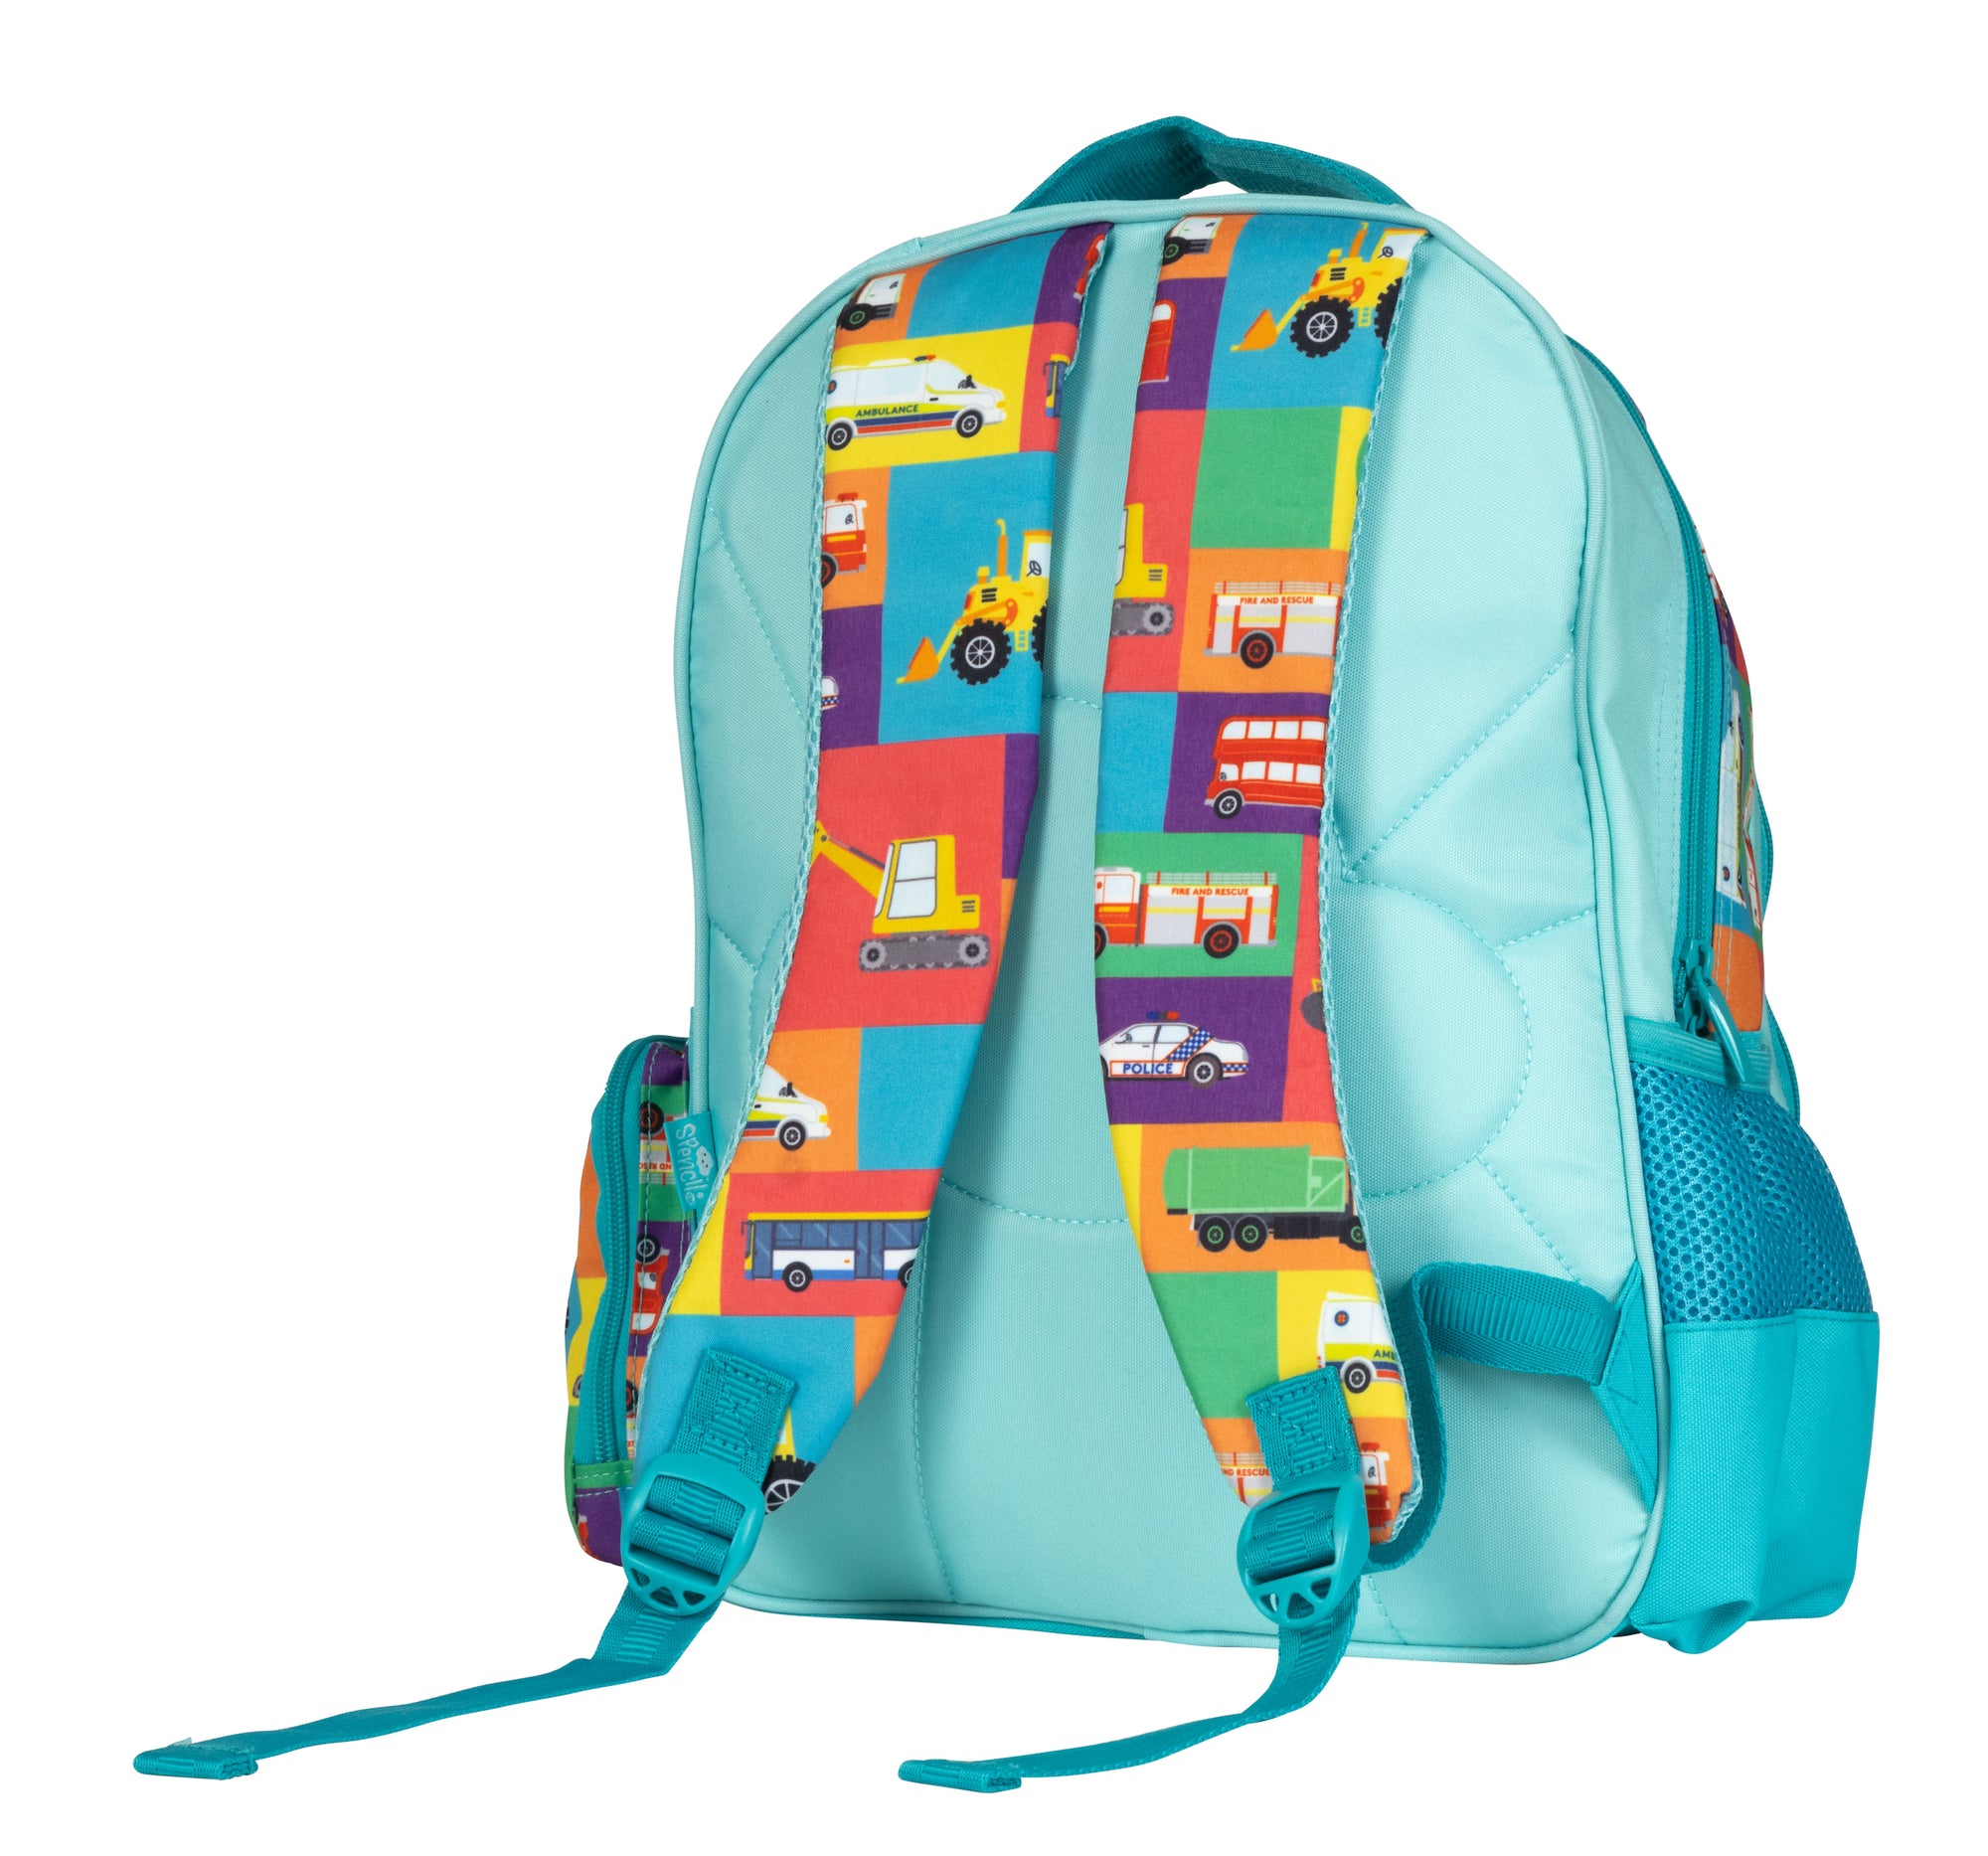 Kids backpack - angus and dudley